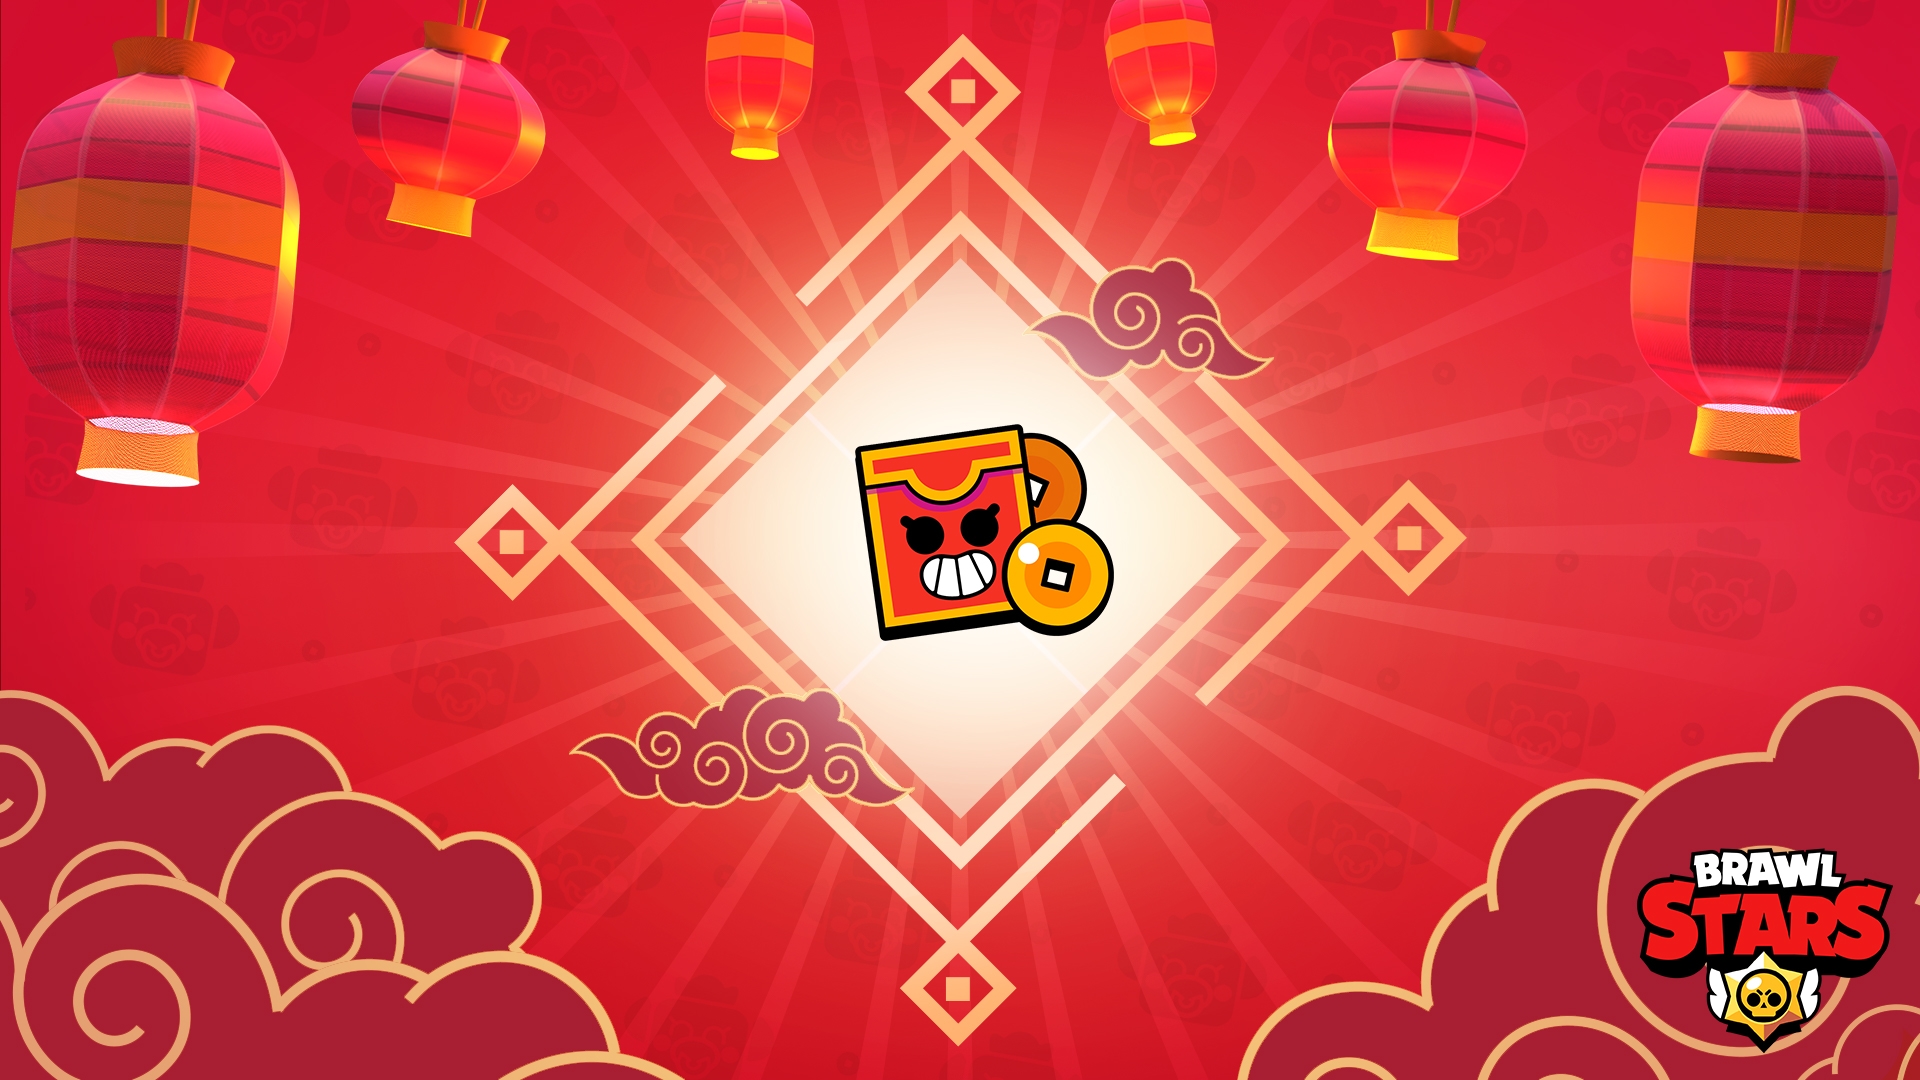 Lunar New Year Begins In Brawl Stars With Free Gifts Dot Esports - comment avoir une mégabox dans brawl stars